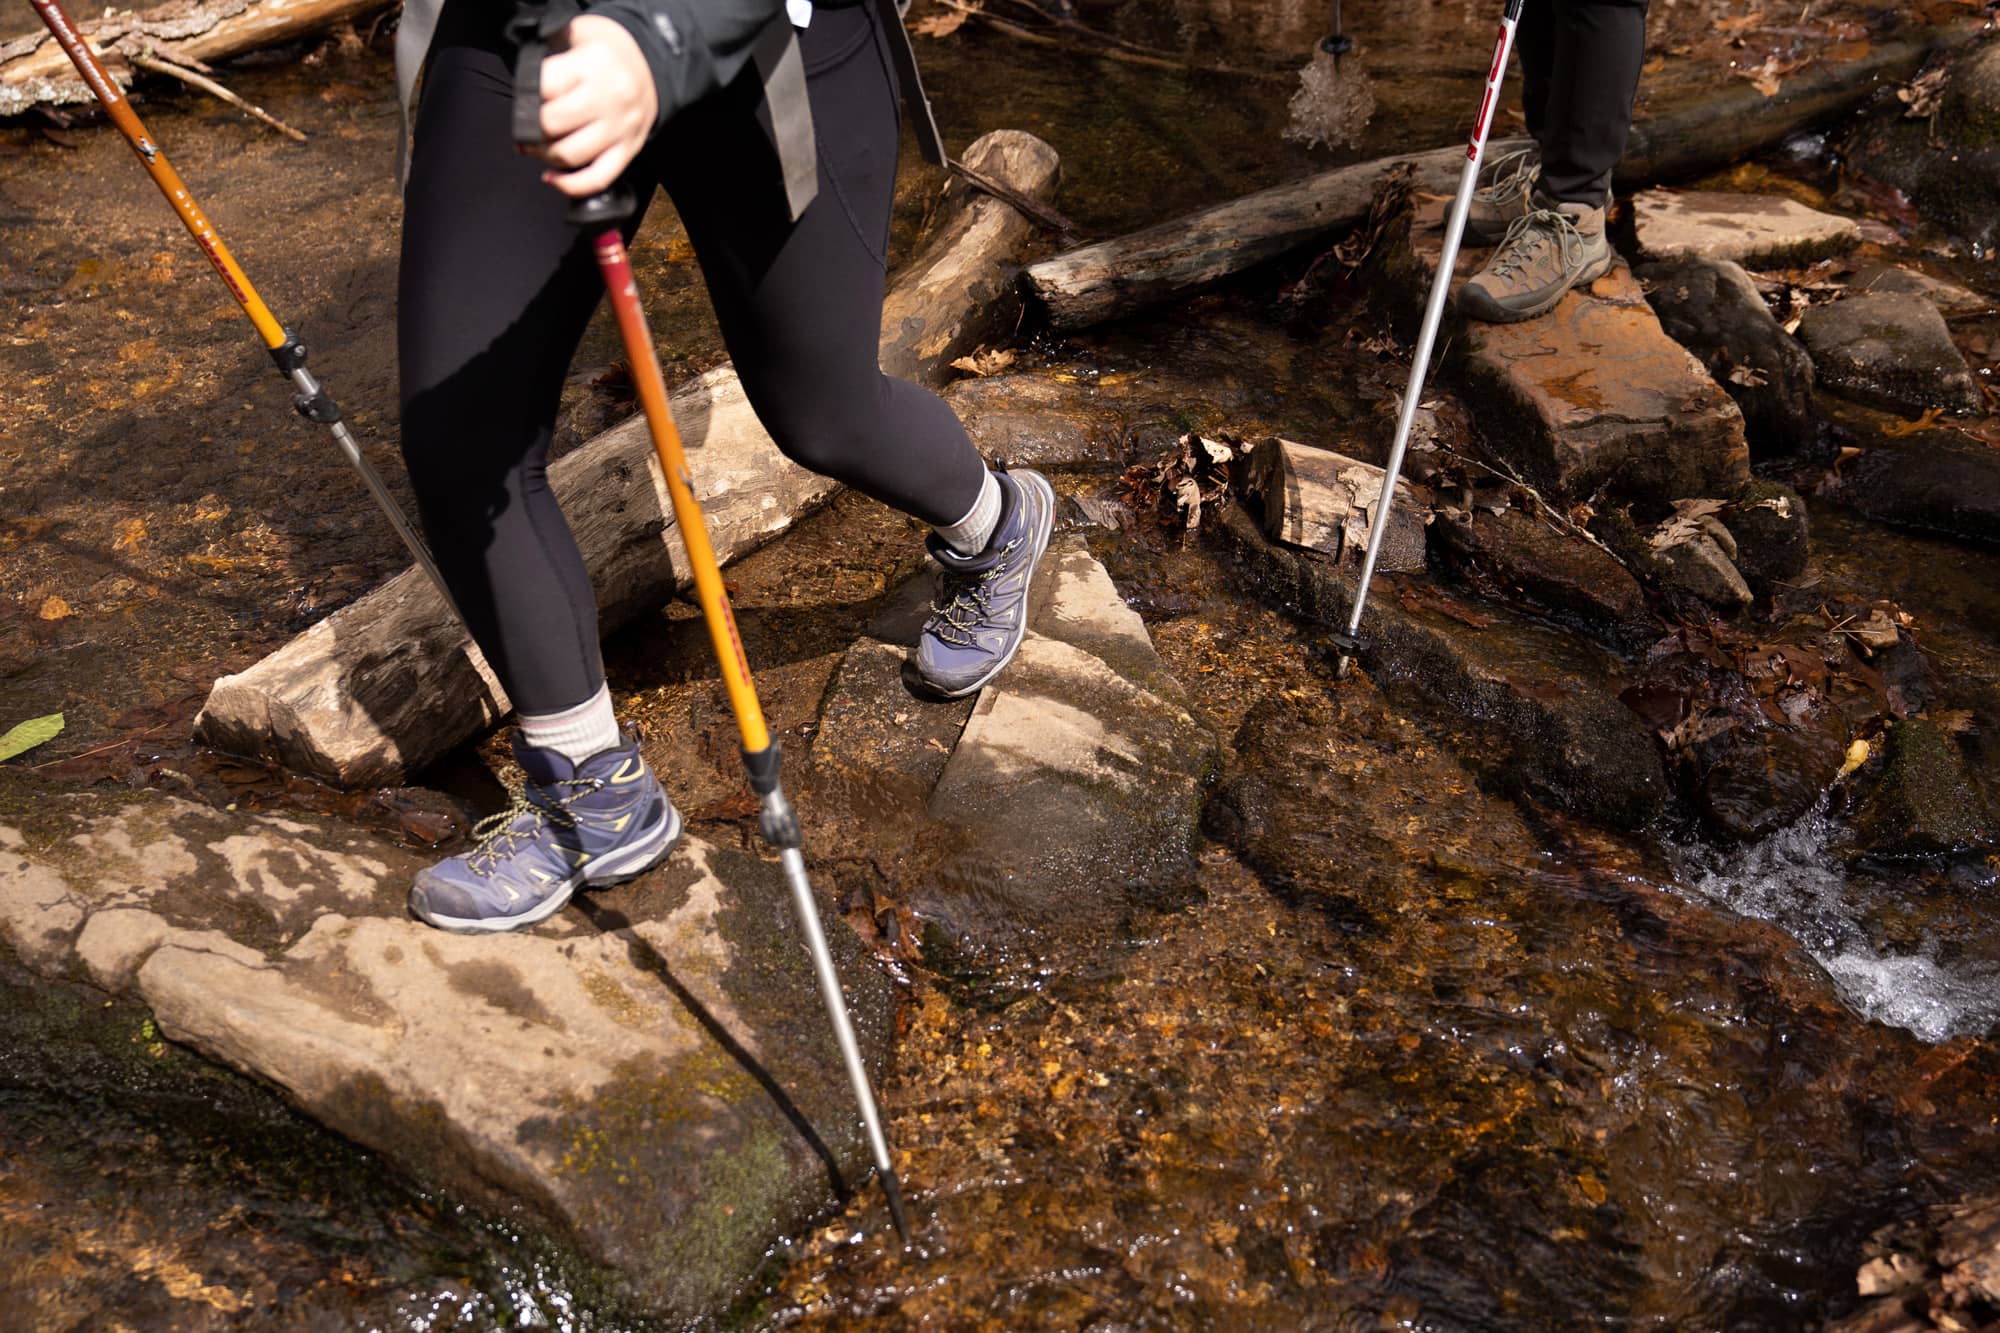 Ohio University students hike across a creek during their second day backpacking a section of the Appalachian Trail in the Nantahala National Forest on Sunday, March 6, 2022, near Franklin, North Carolina.